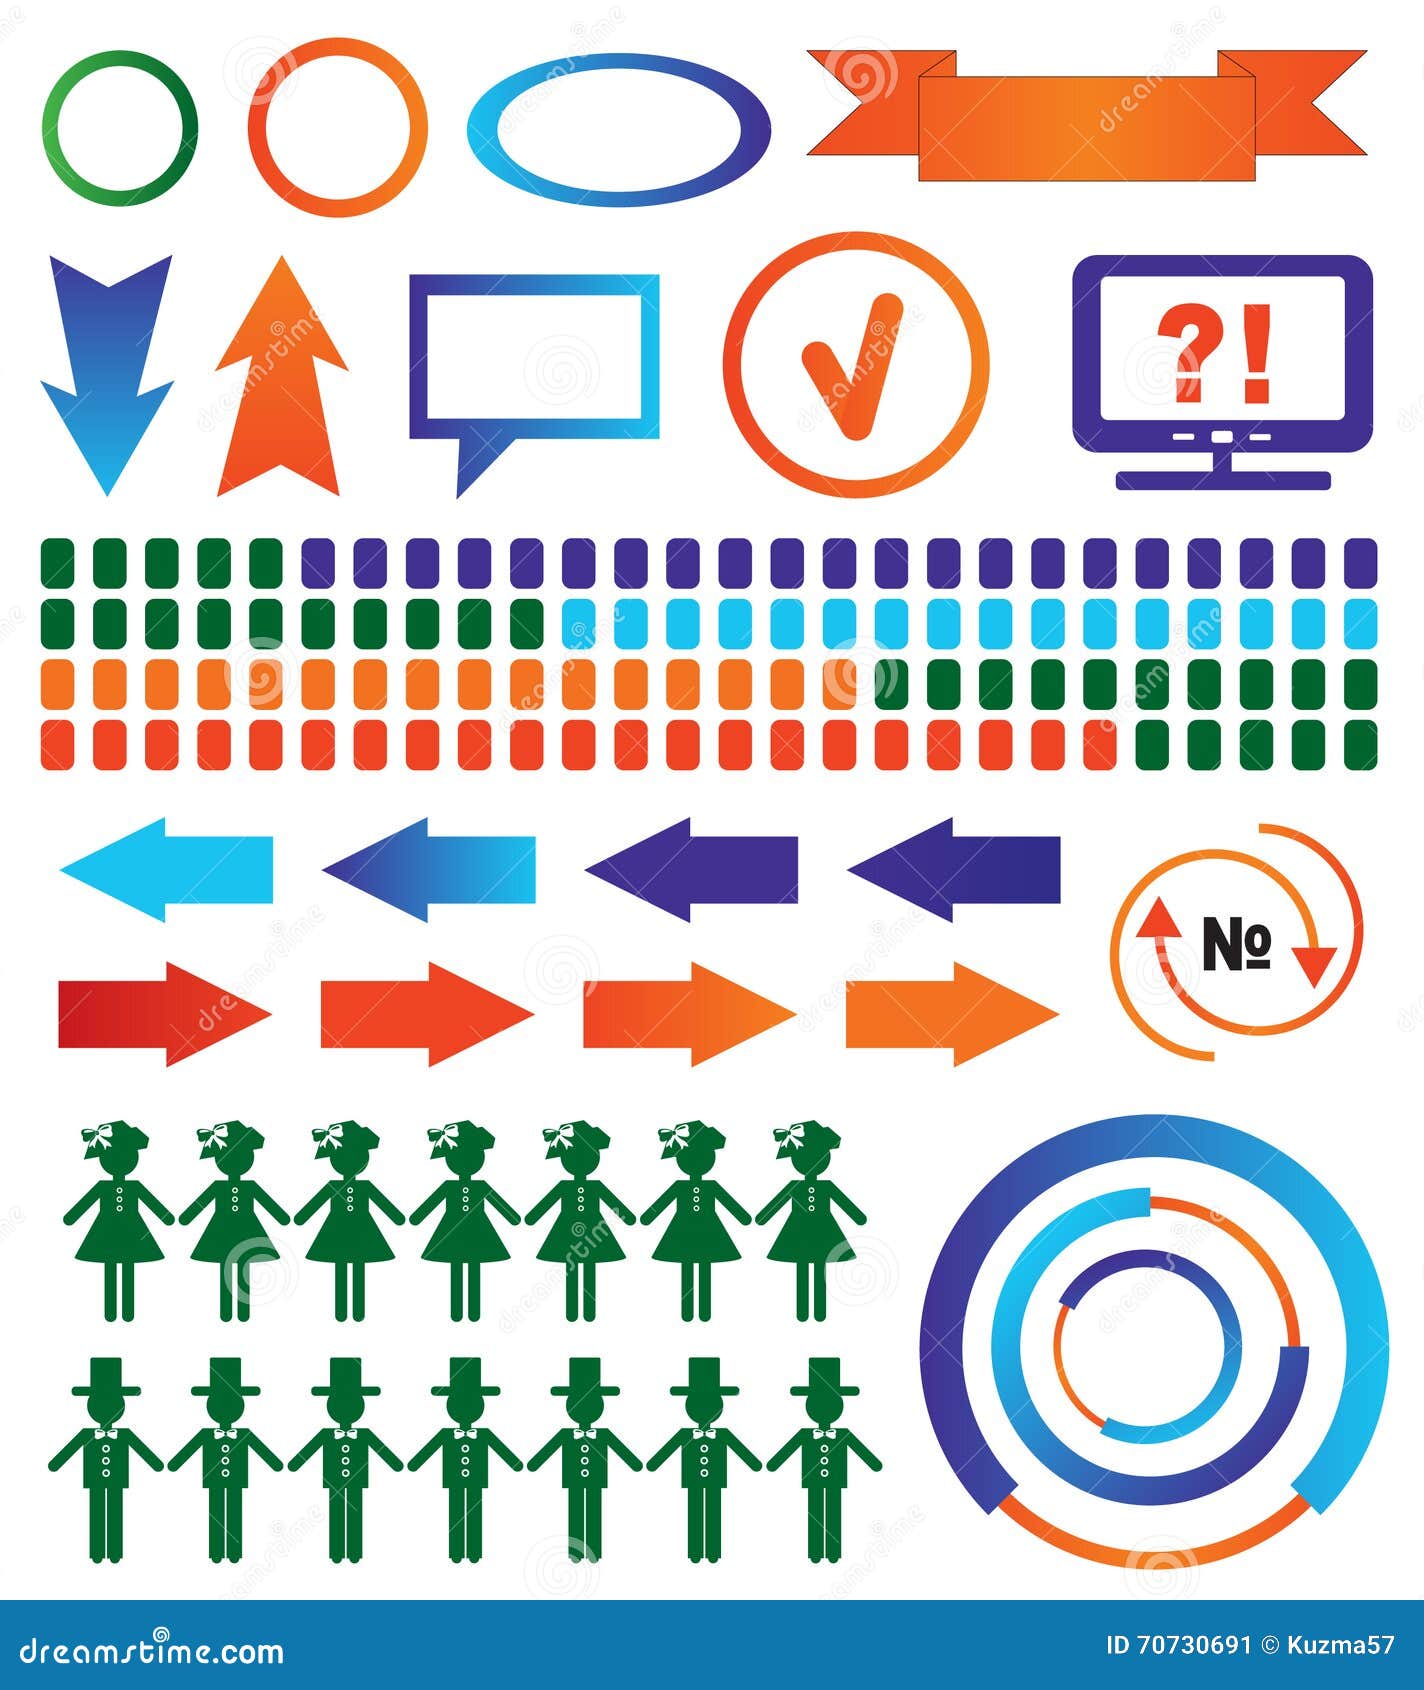 Download Elements Of Infographic Stock Vector - Image: 70730691